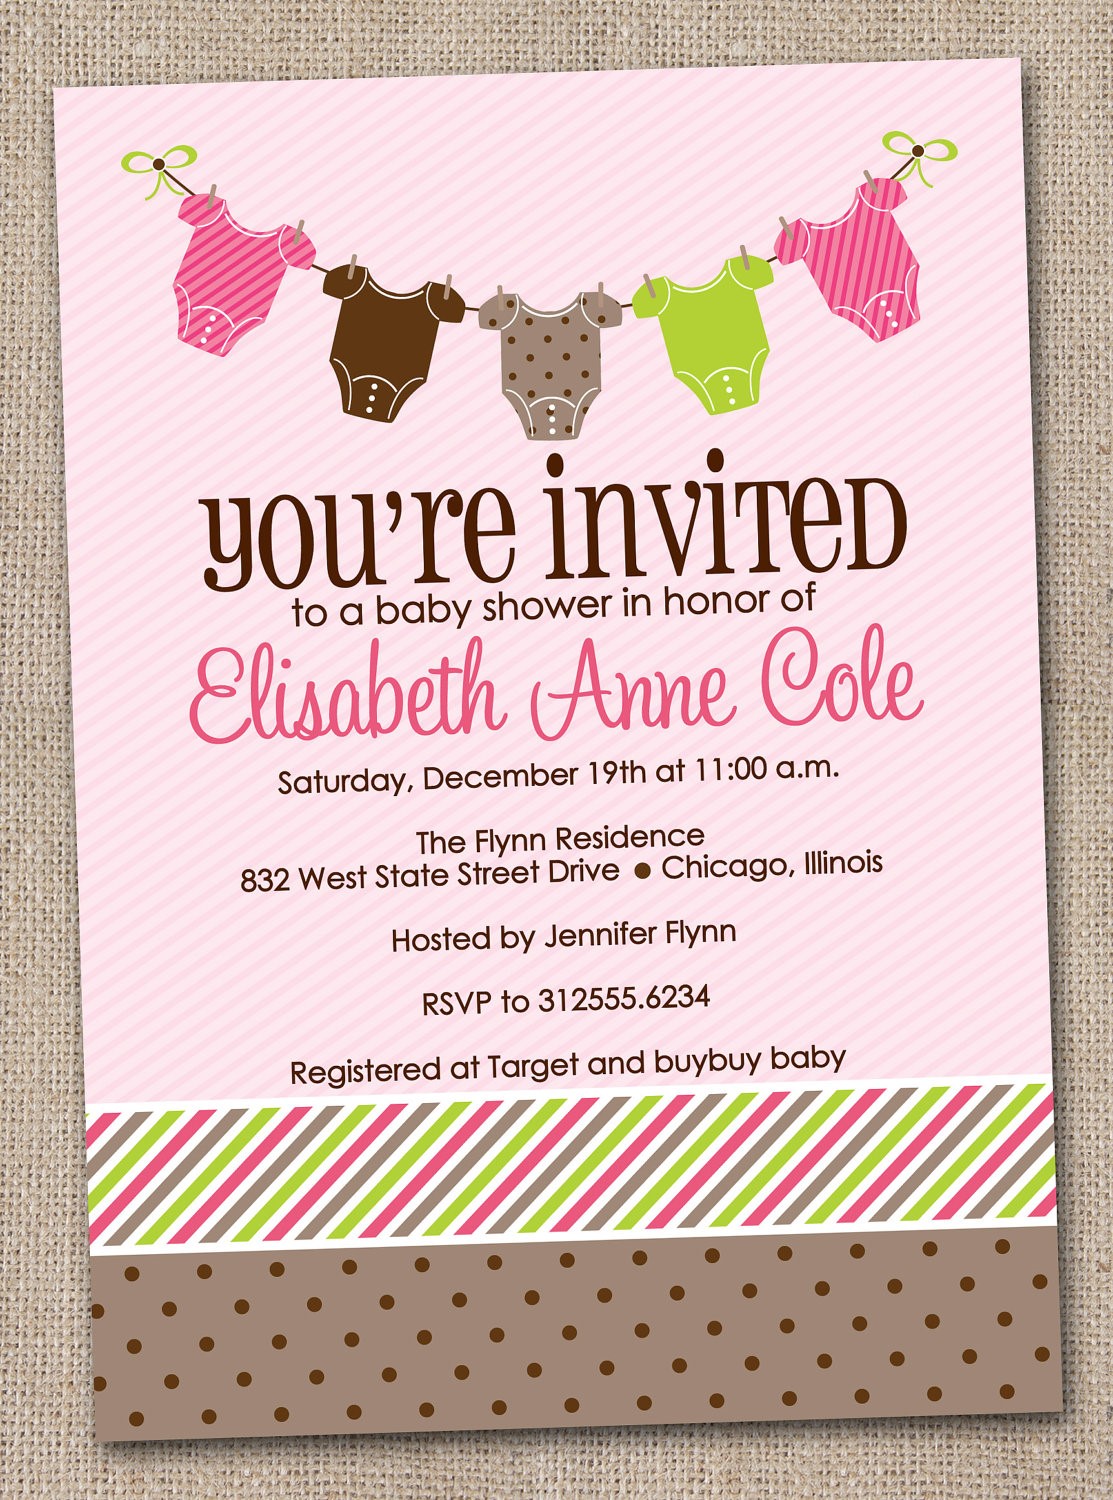 Full Size of Baby Shower:graceful Baby Shower Cards Image Designs Baby Shower Games With Owl Baby Shower Invitations Plus Baby Shower Quilt Together With Couples Baby Shower As Well As Baby Shower Products